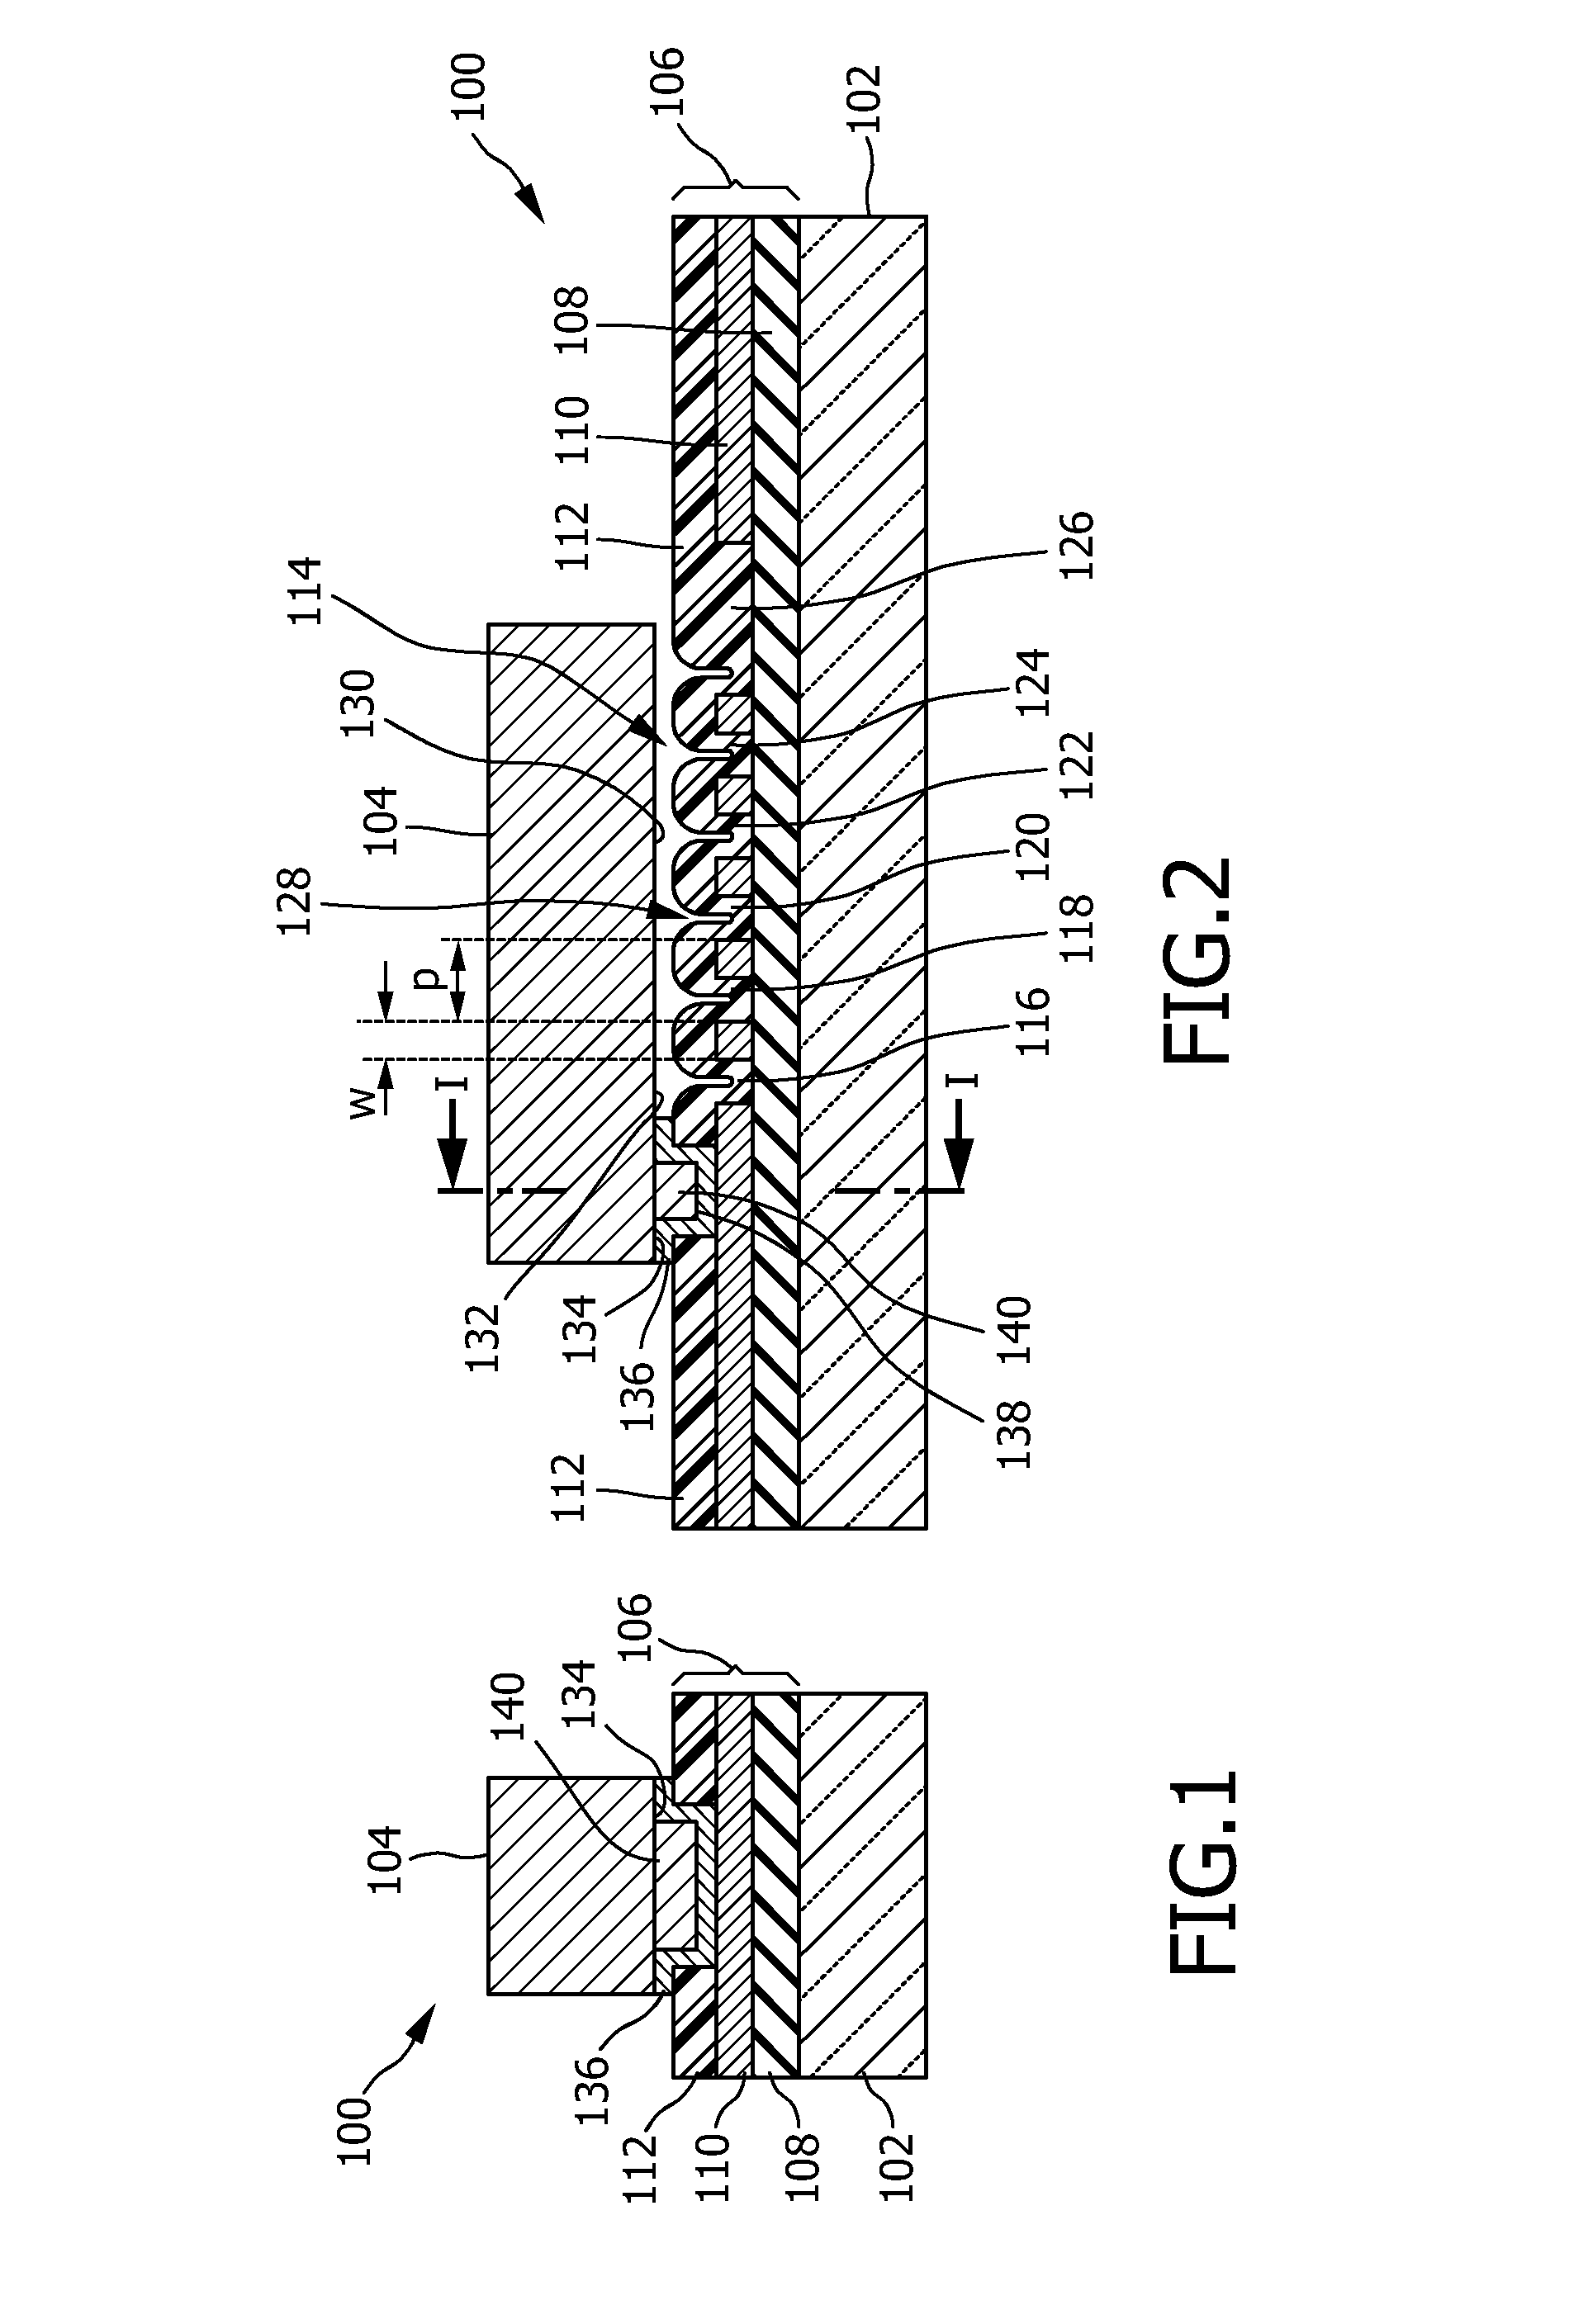 Reducing stress between a substrate and a projecting electrode on the substrate